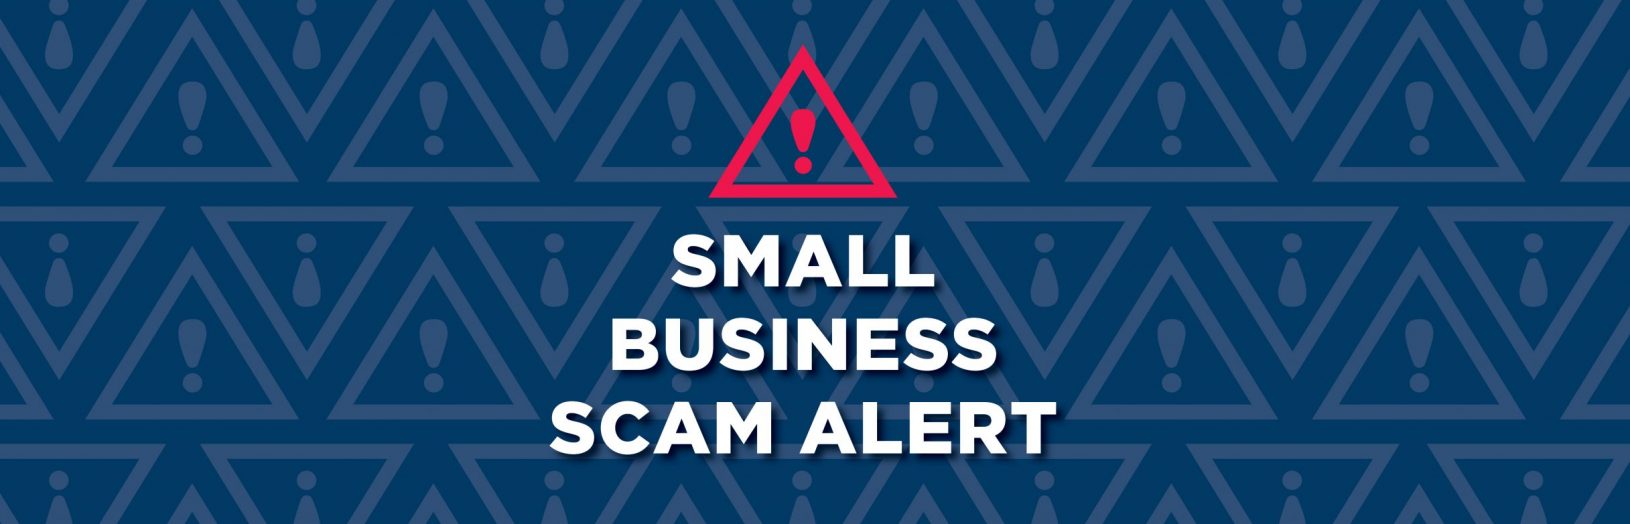 small business scam